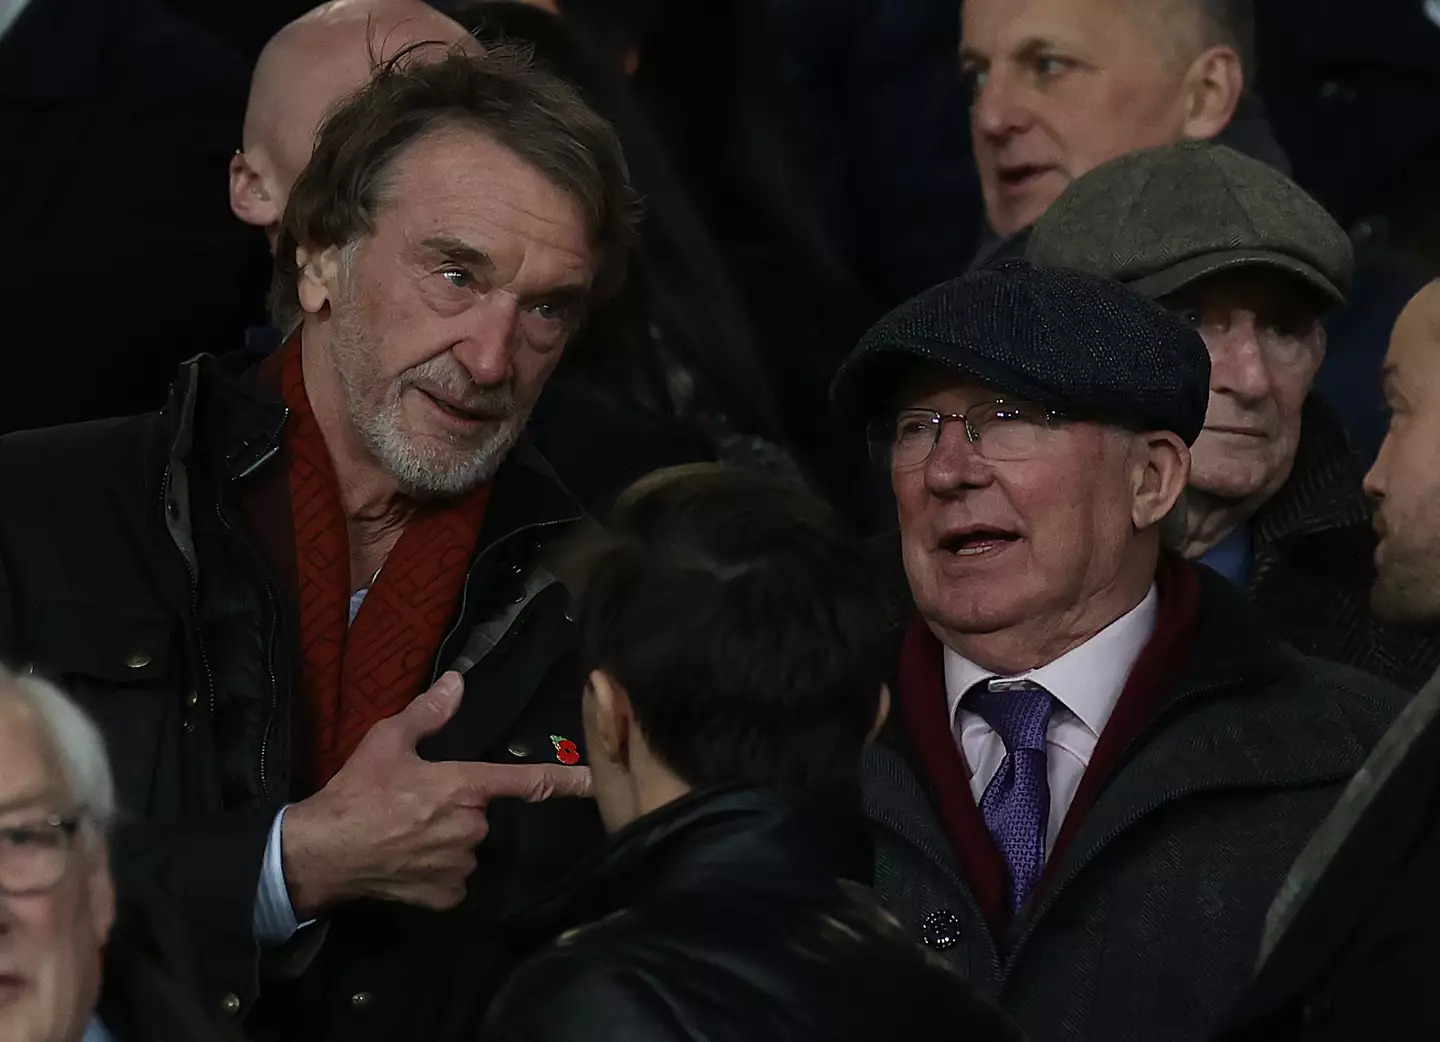 Ratcliffe has taken control of footballing matters at Old Trafford (Getty)